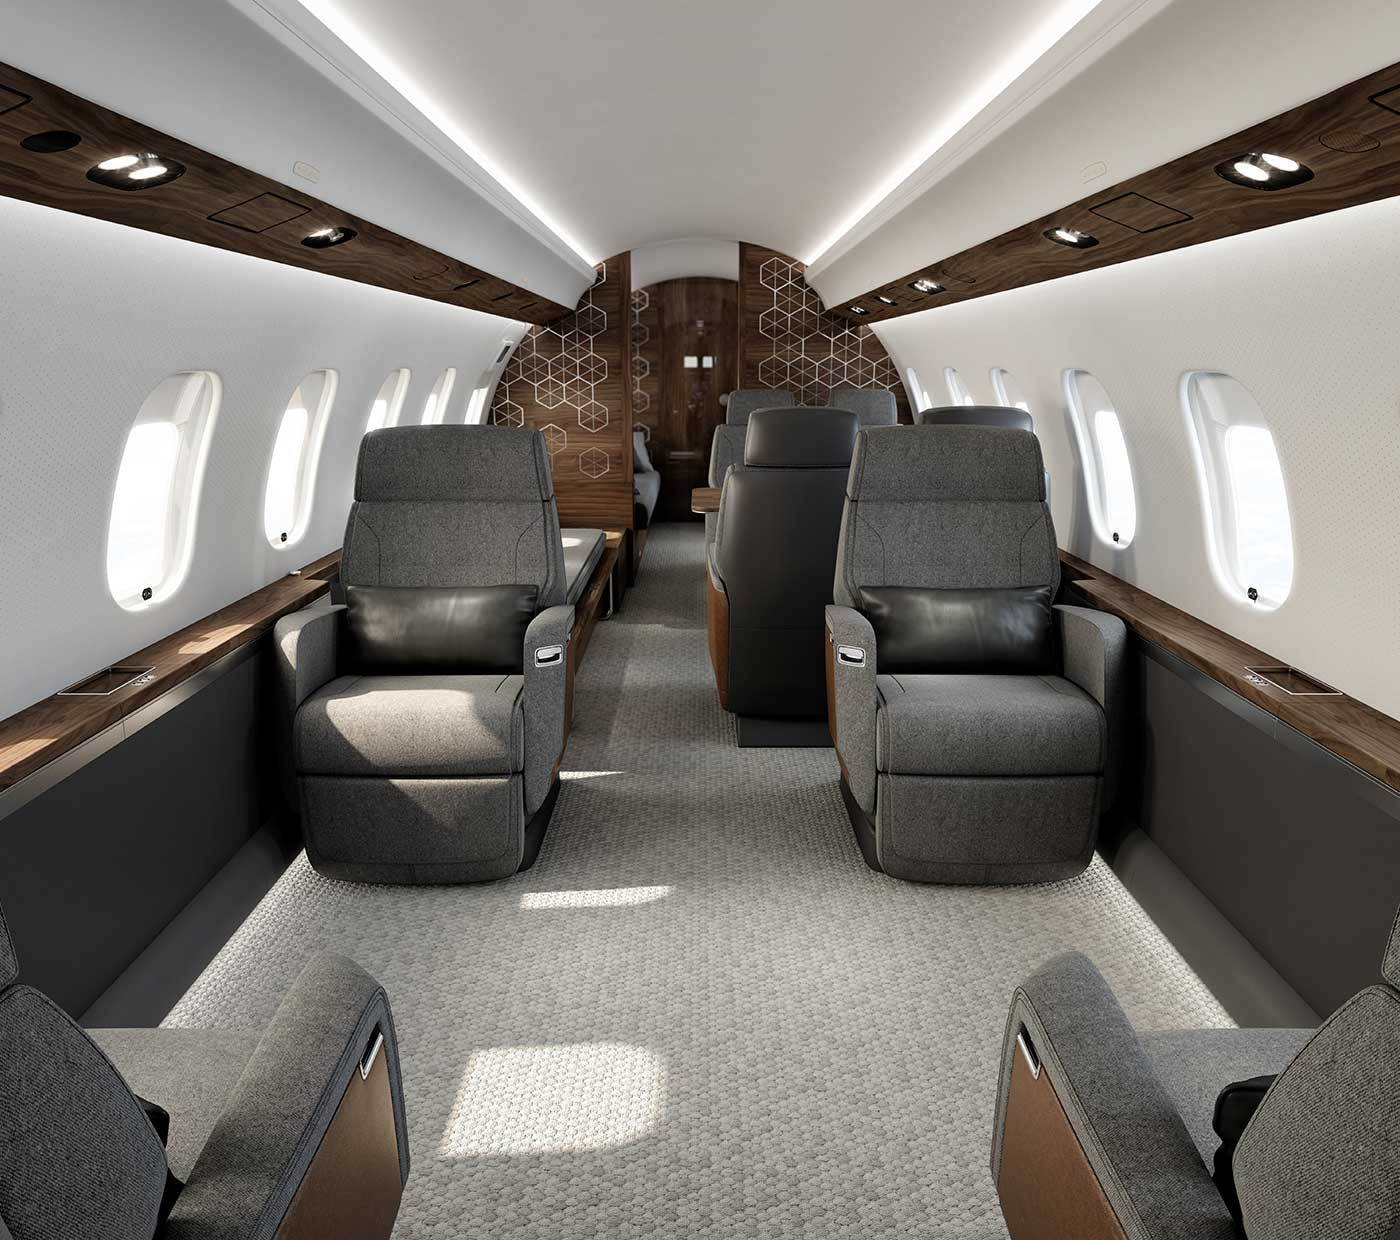 Global 6500 largest cabin